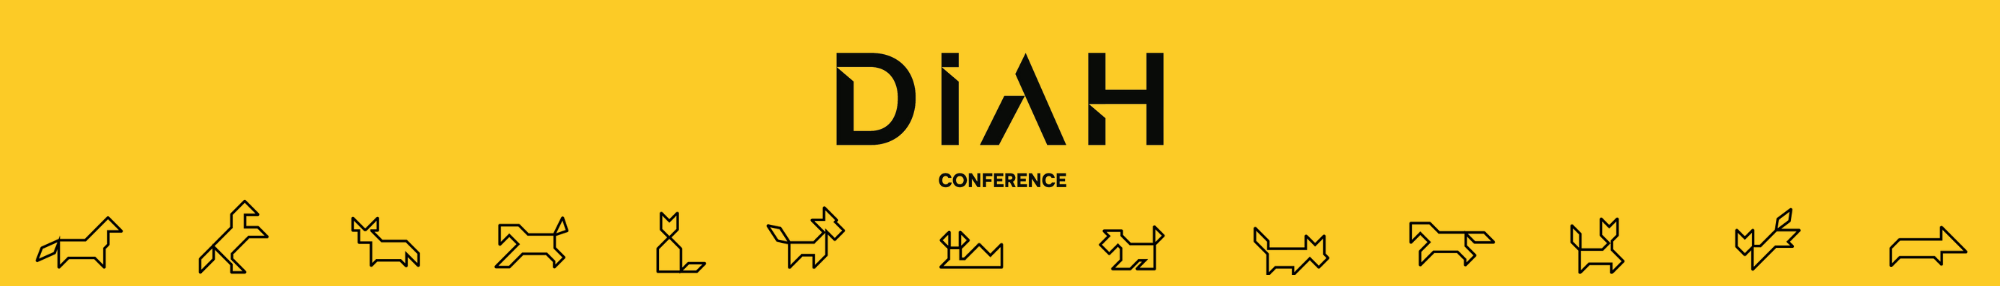 DIAH-Conference